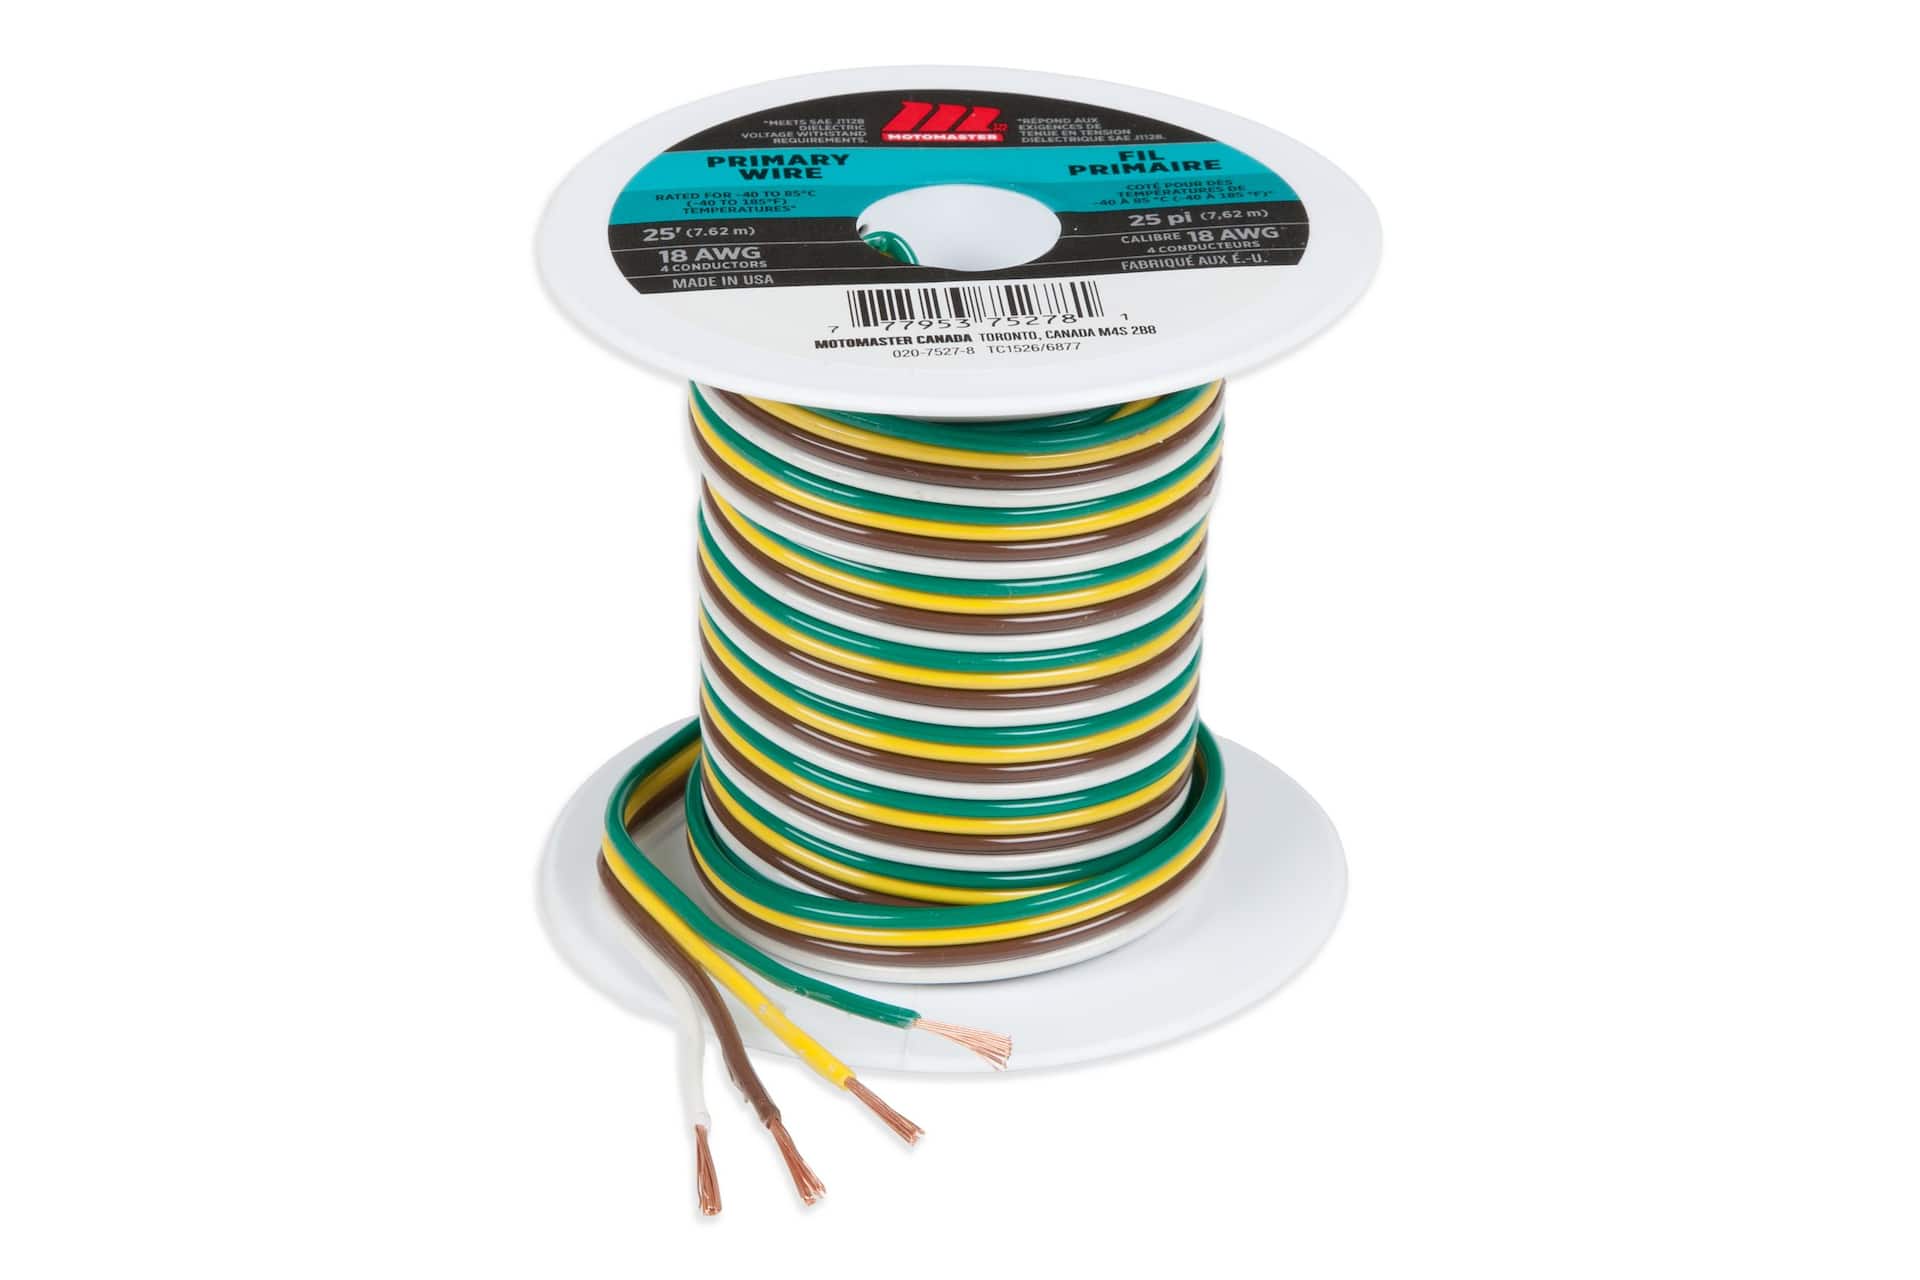 MotoMaster 18 AWG 4-Conductor Wire, 25-ft